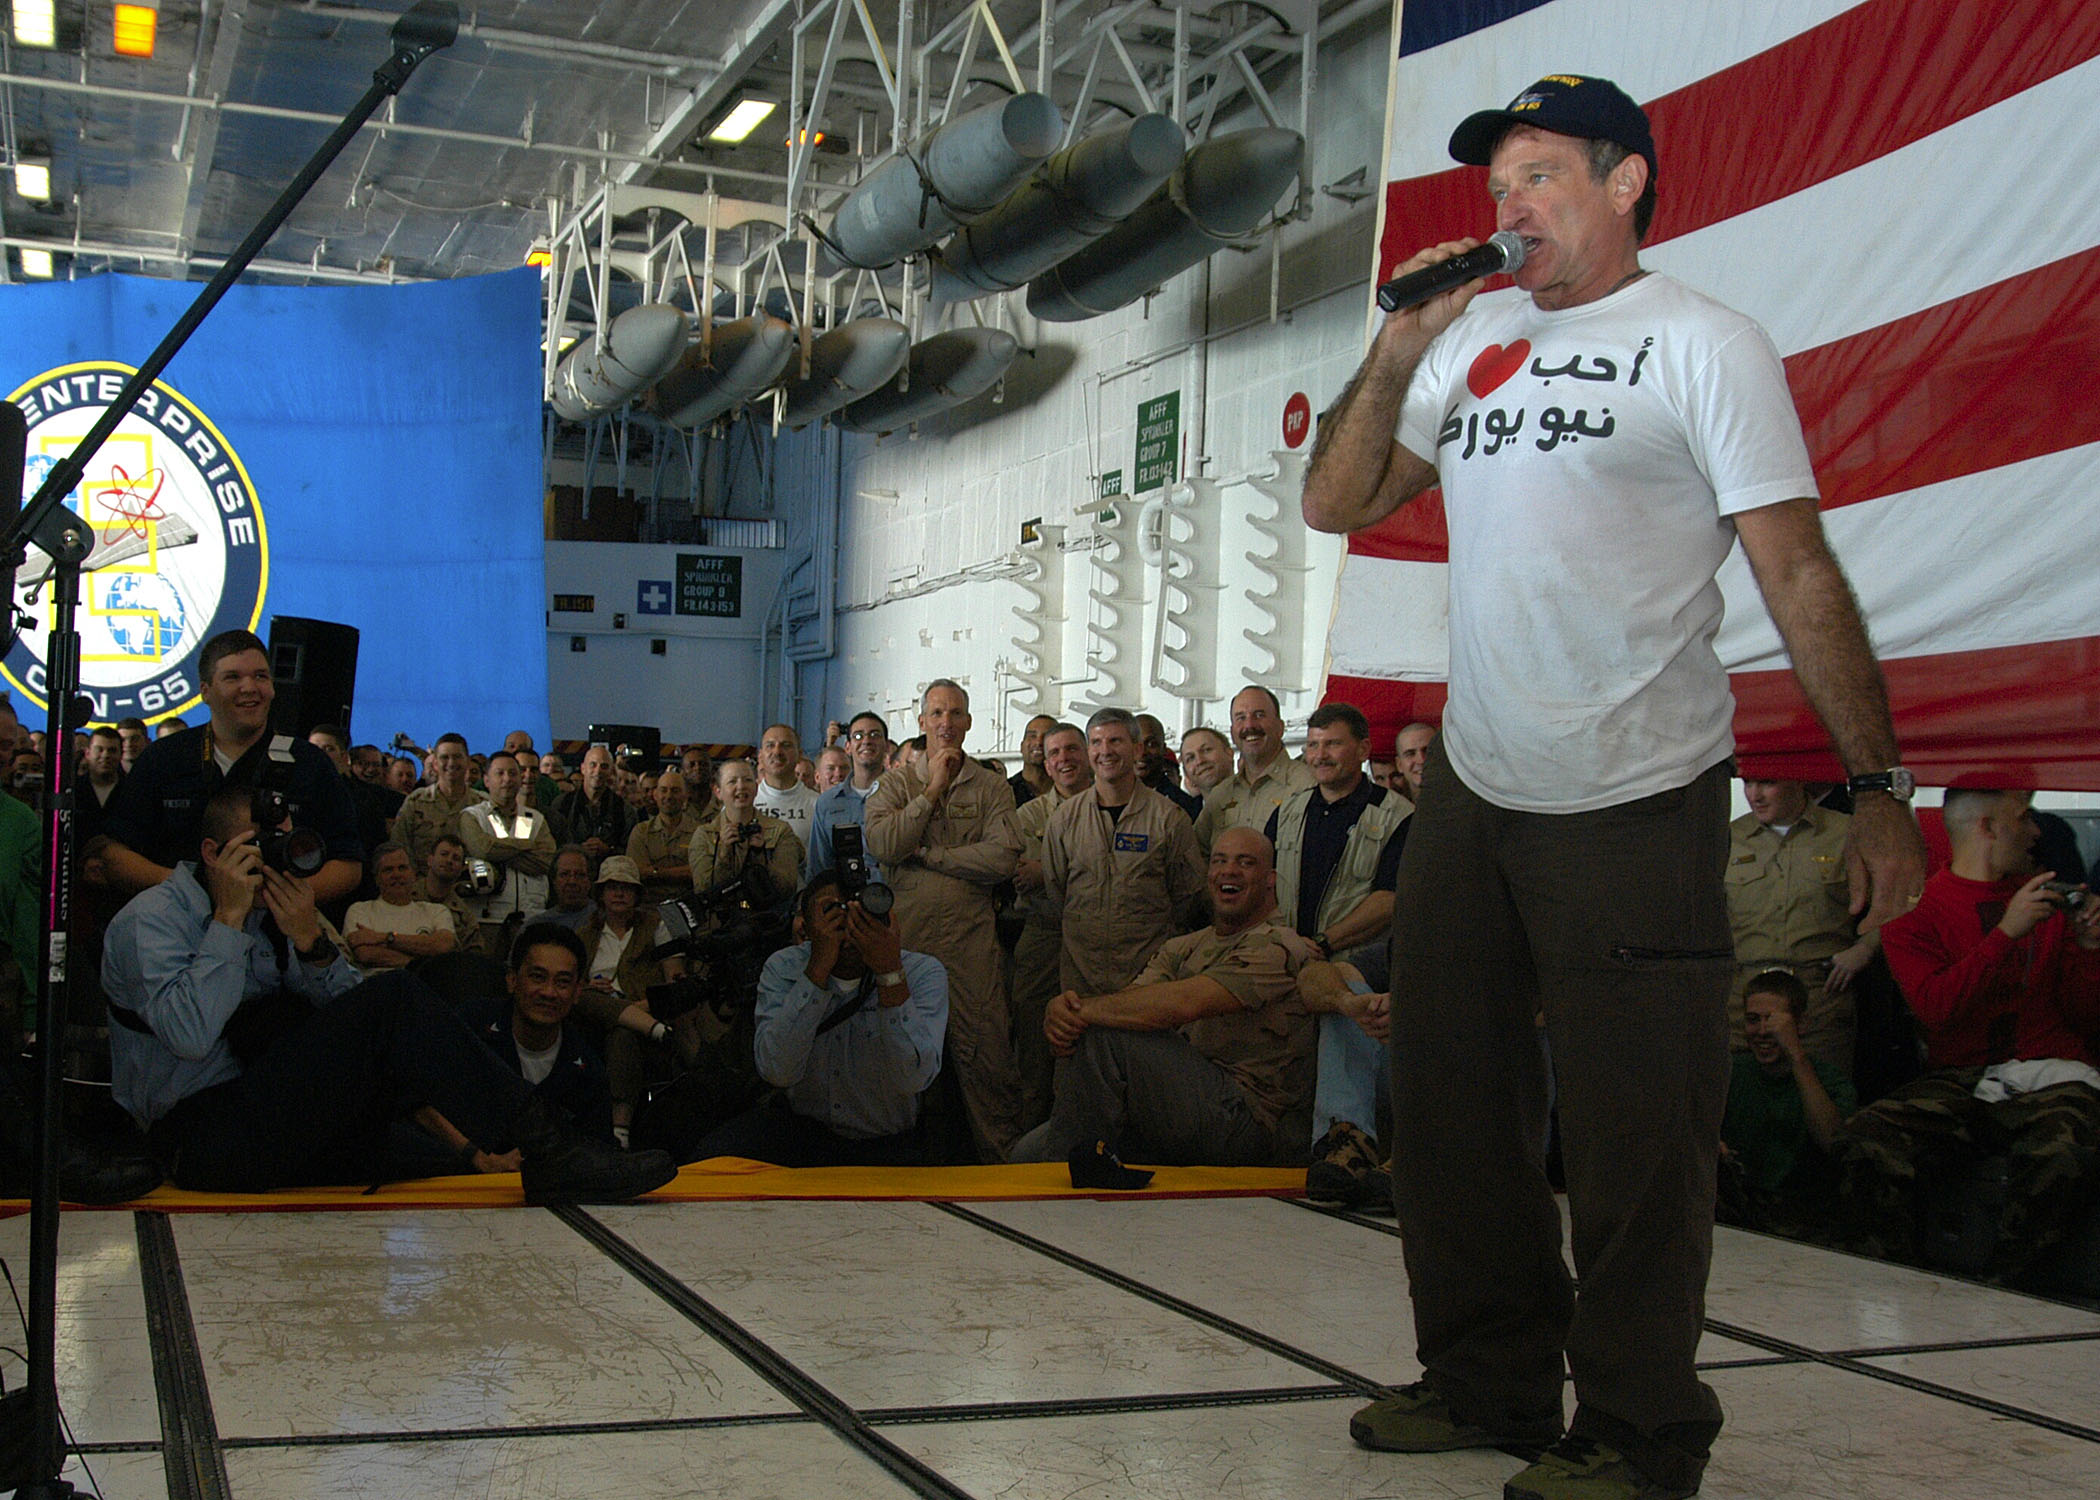  Robin Williams performing for US troops in the Middle East in 2003. Photo by Milosz Reterski. CC-Public Domain